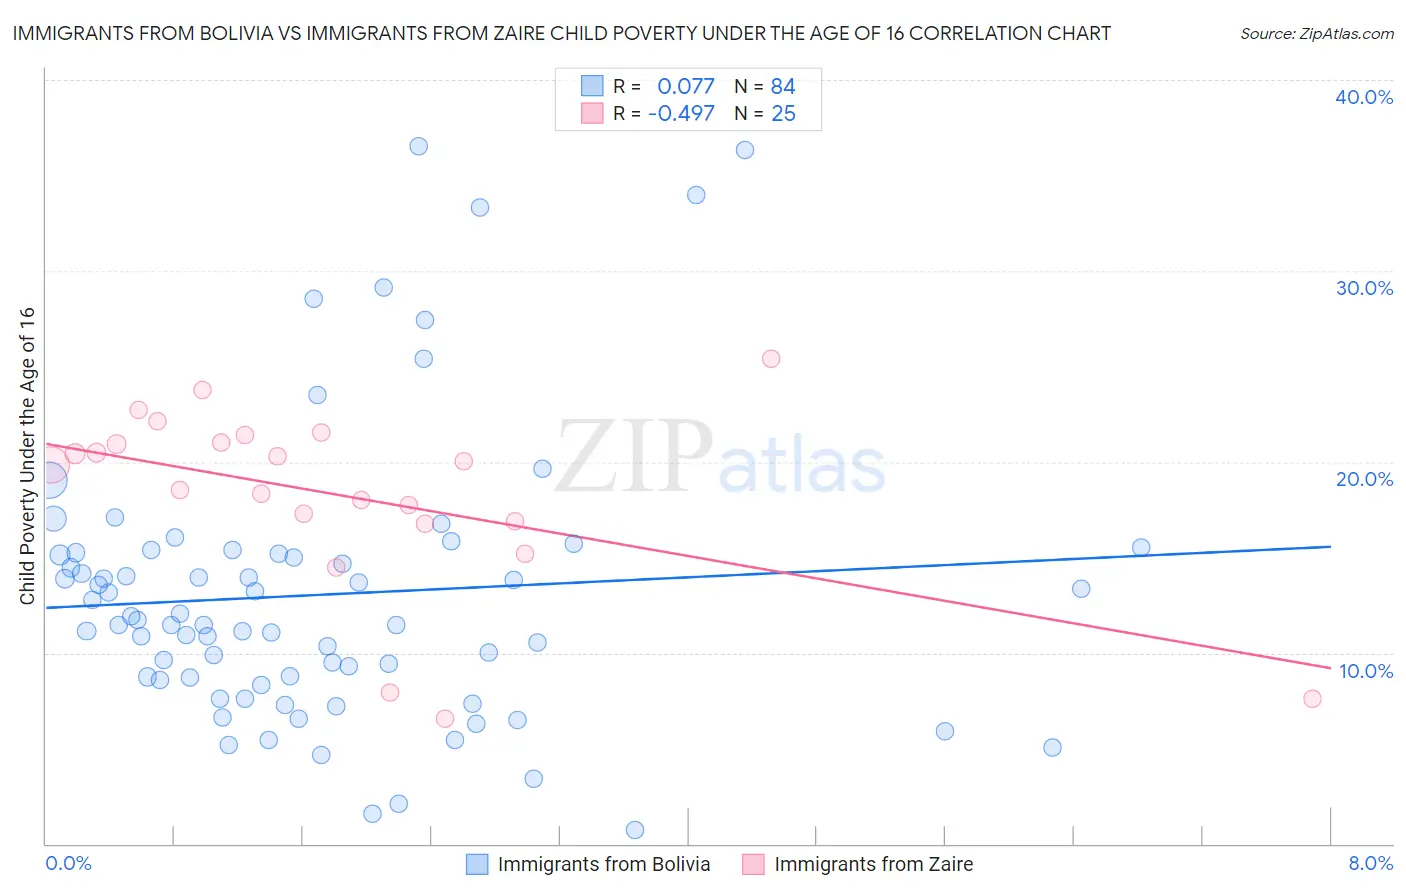 Immigrants from Bolivia vs Immigrants from Zaire Child Poverty Under the Age of 16